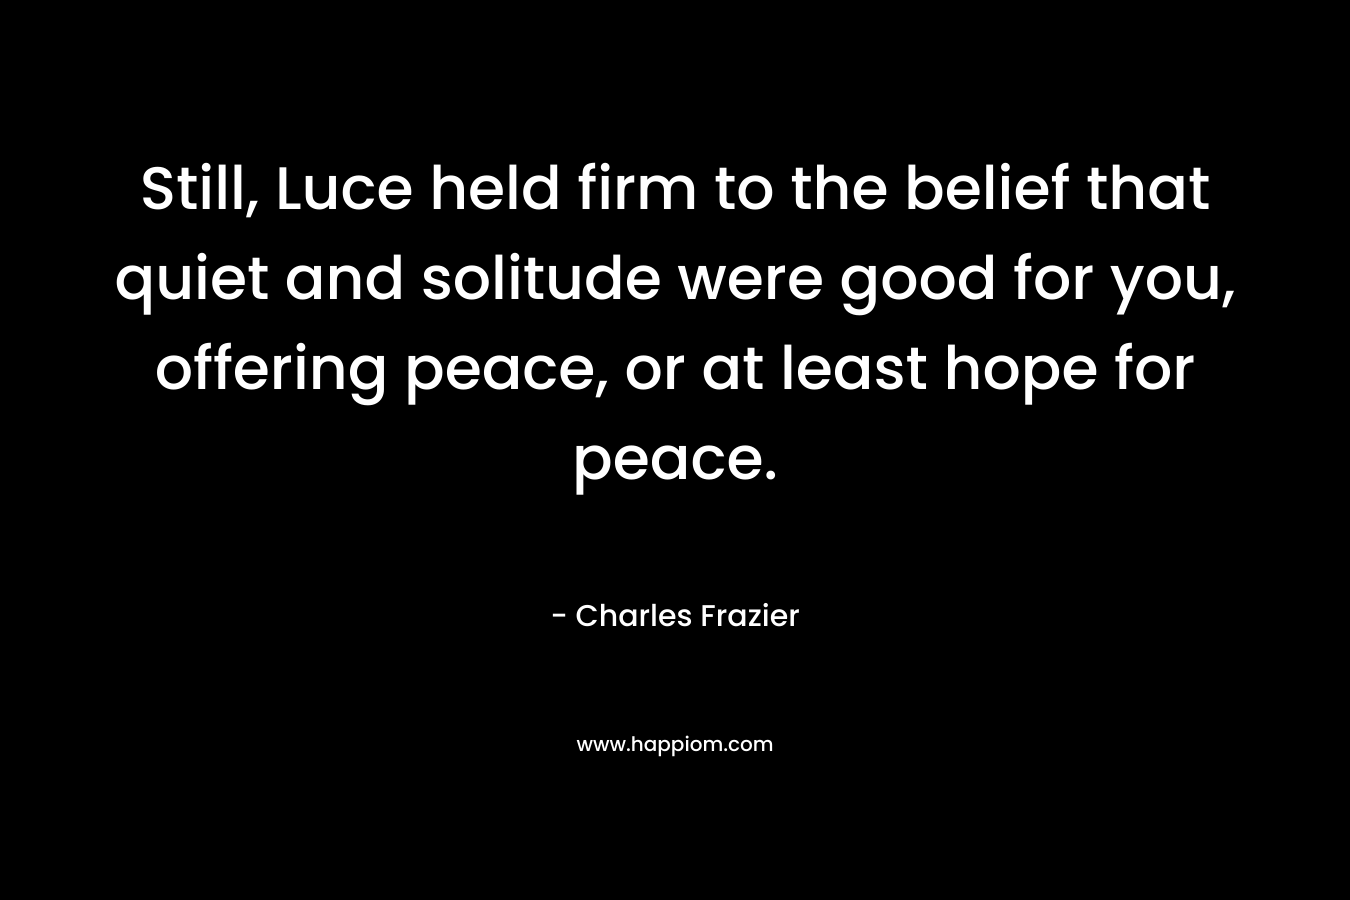 Still, Luce held firm to the belief that quiet and solitude were good for you, offering peace, or at least hope for peace.